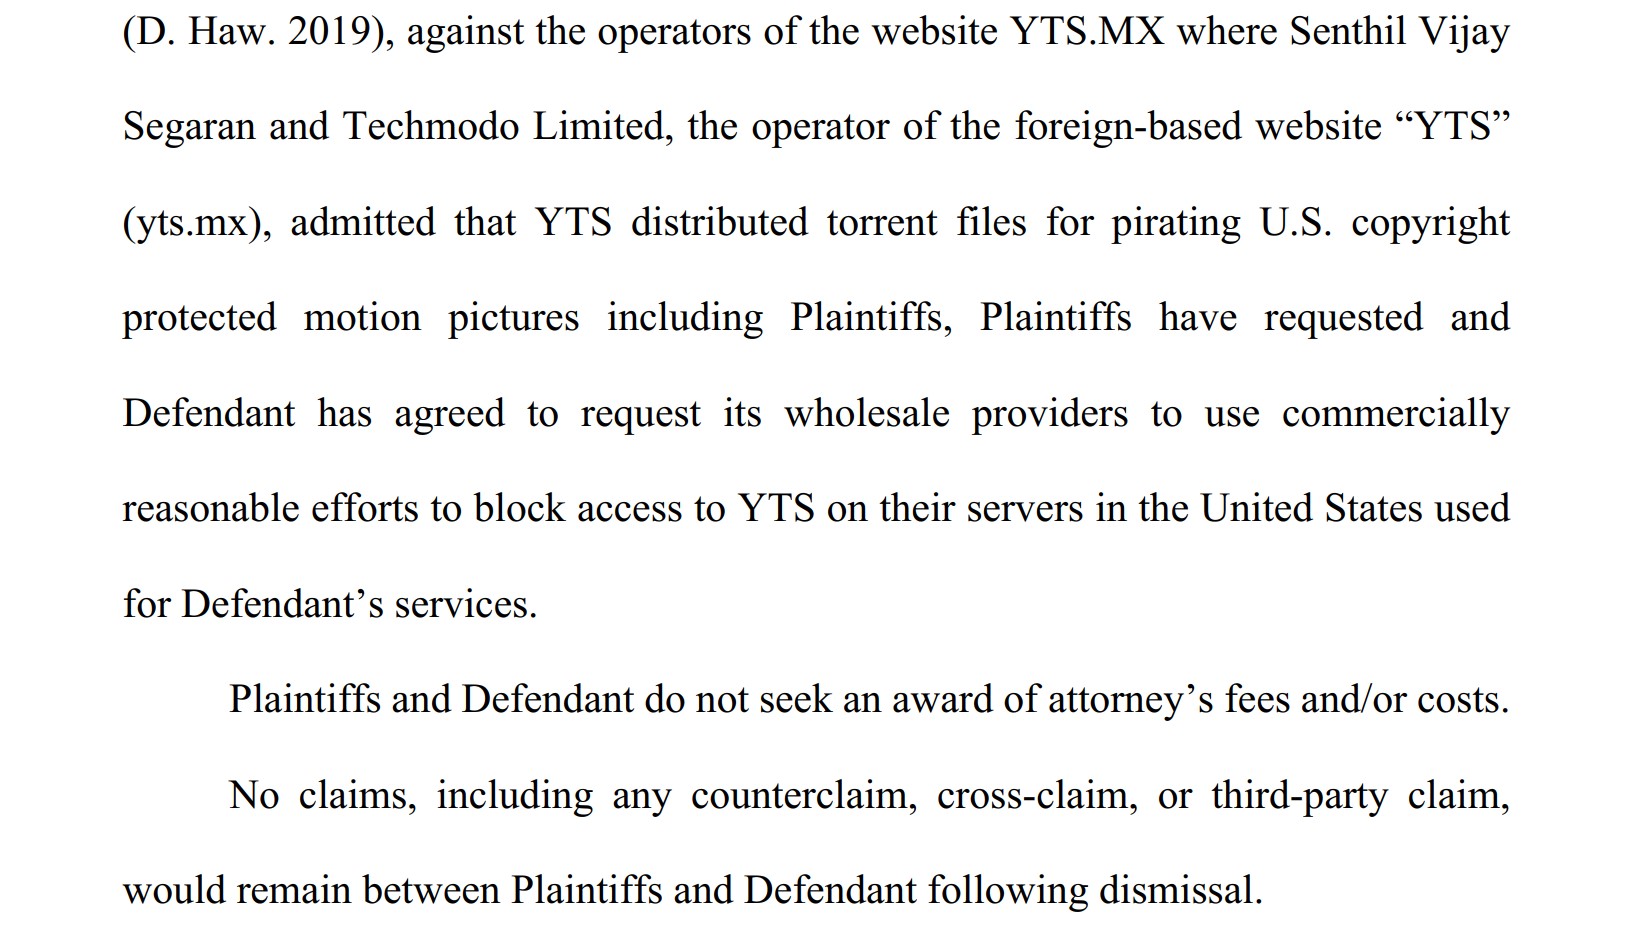 earthlink agrees to block TYS